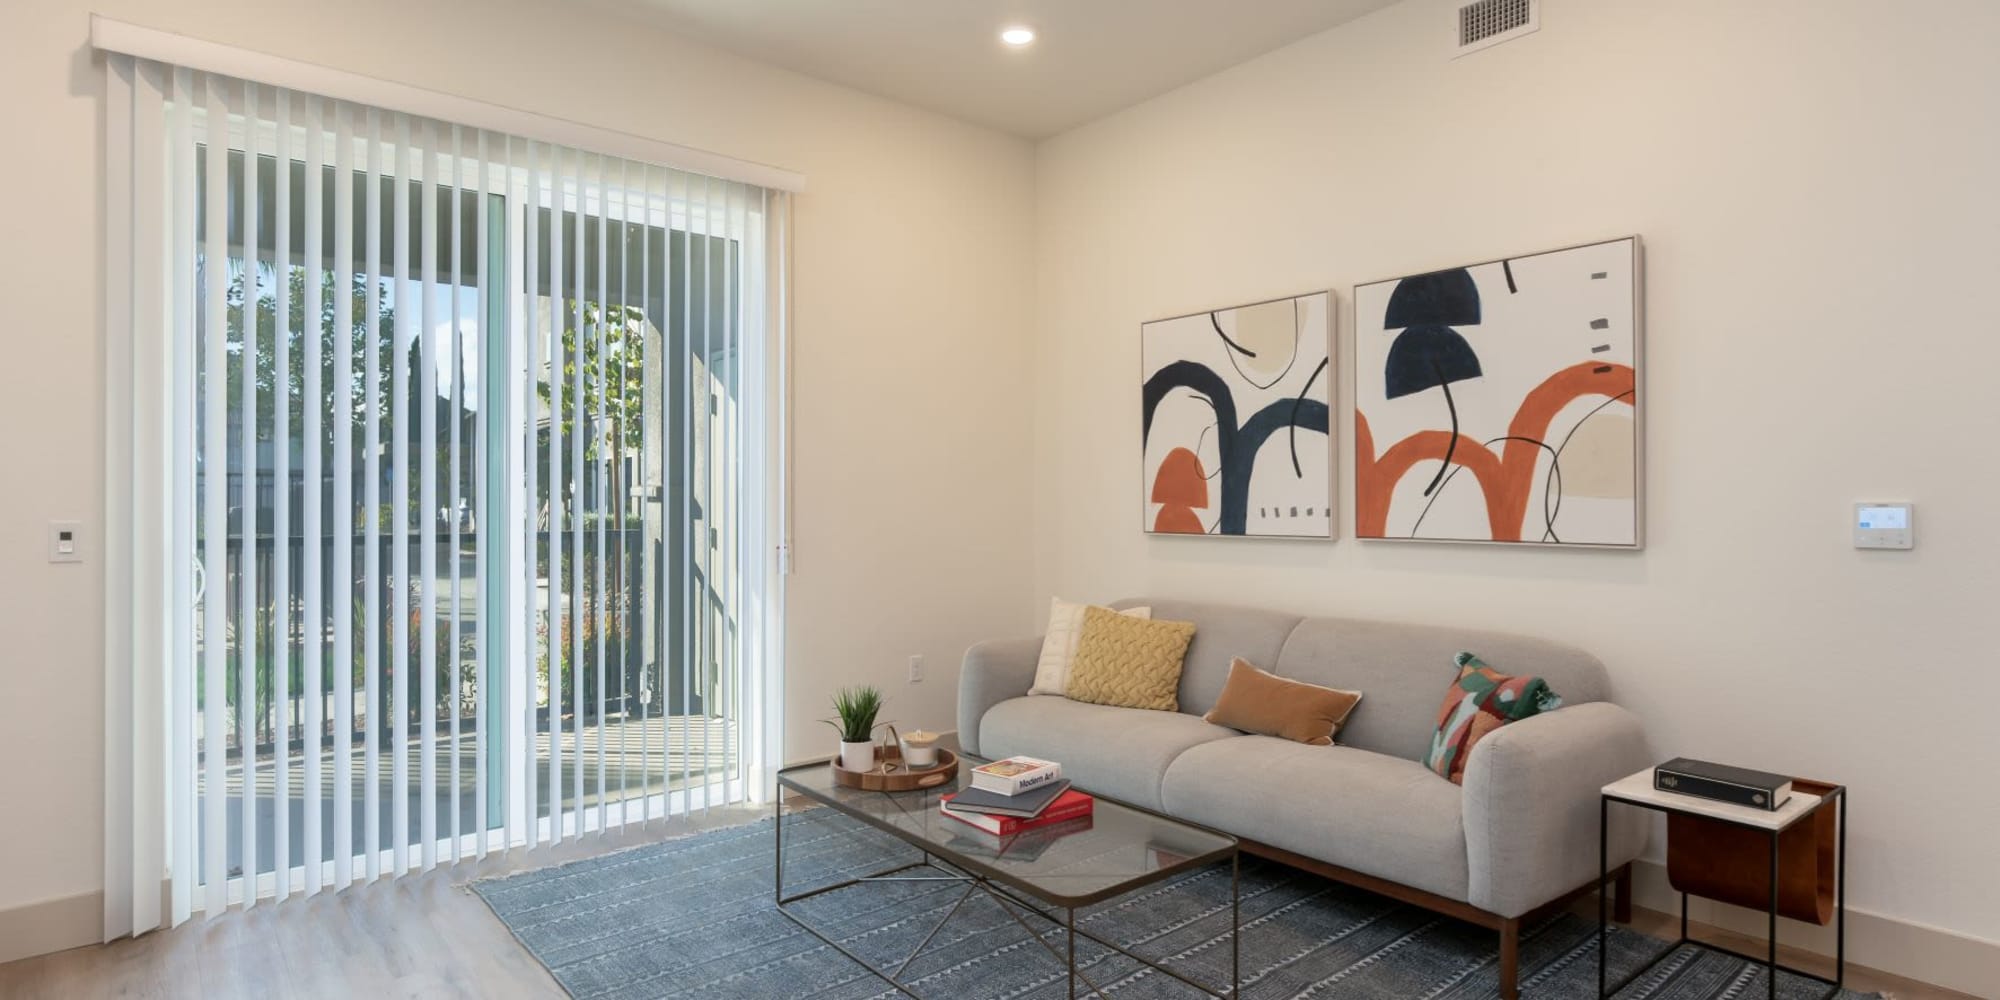 Living room with doors to patio or balcony at Towne Centre Apartments in Lathrop, California